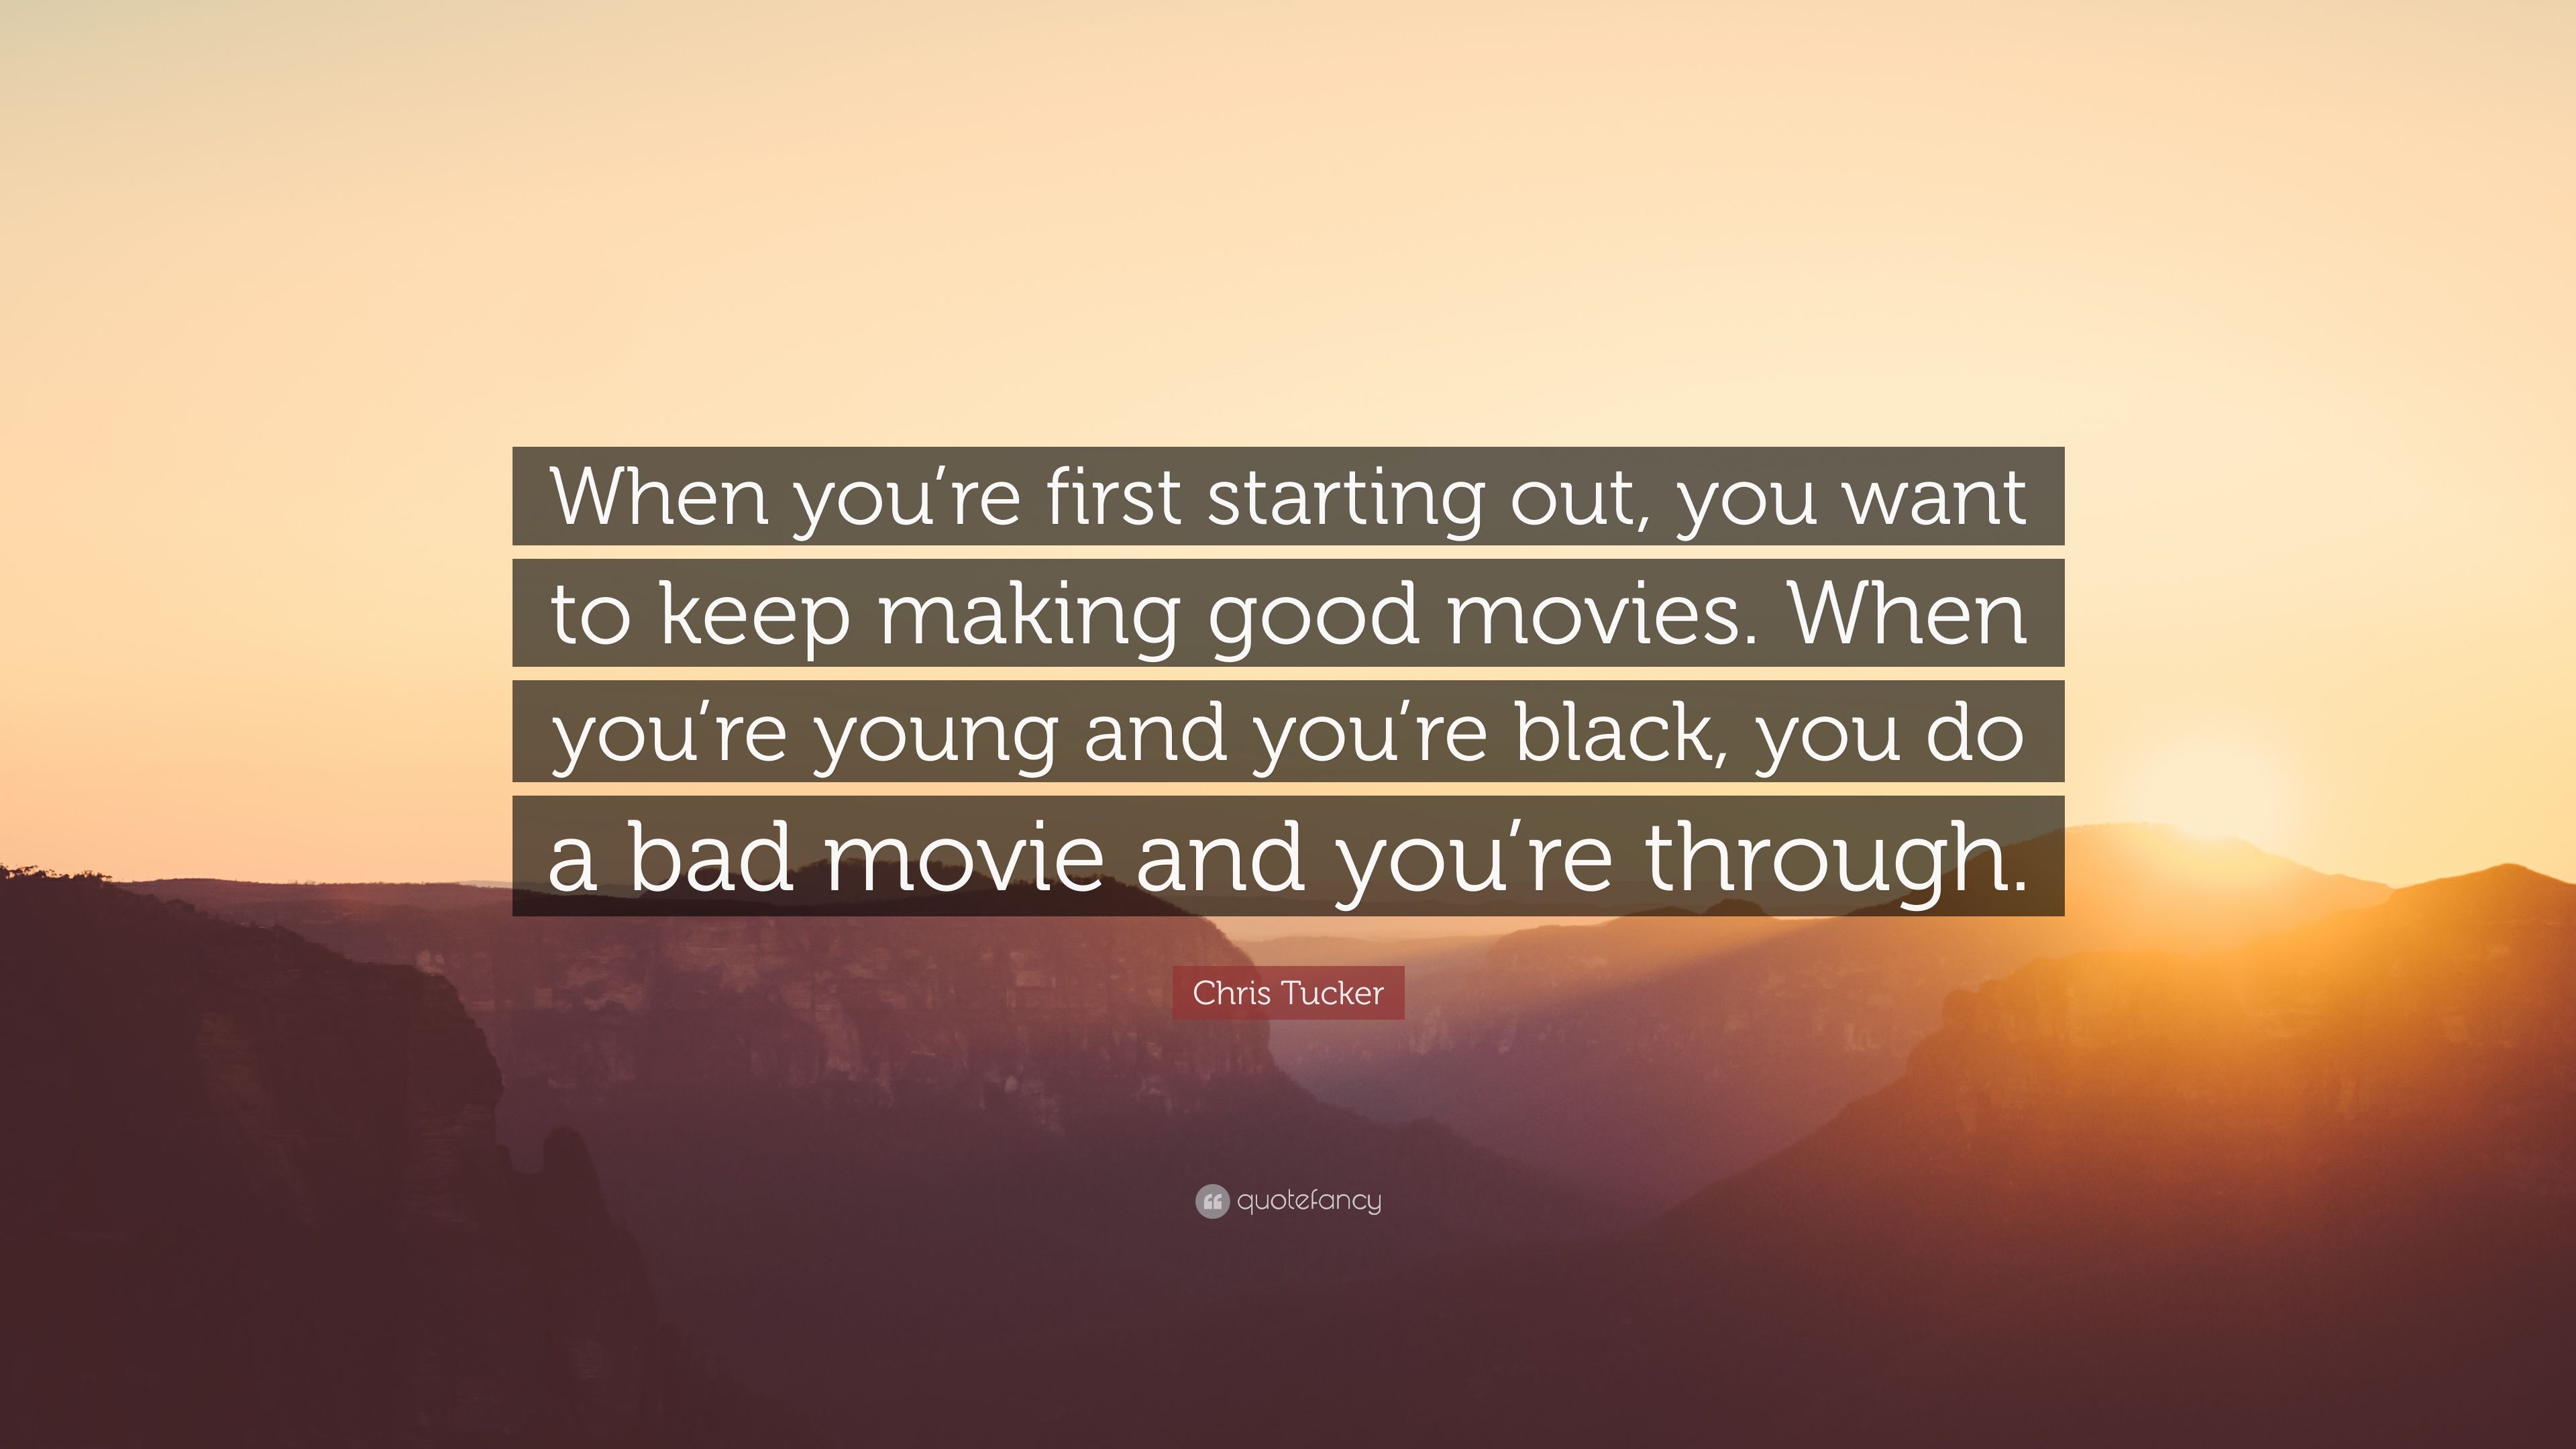 Chris Tucker Quote: “When you're first starting out, you want to